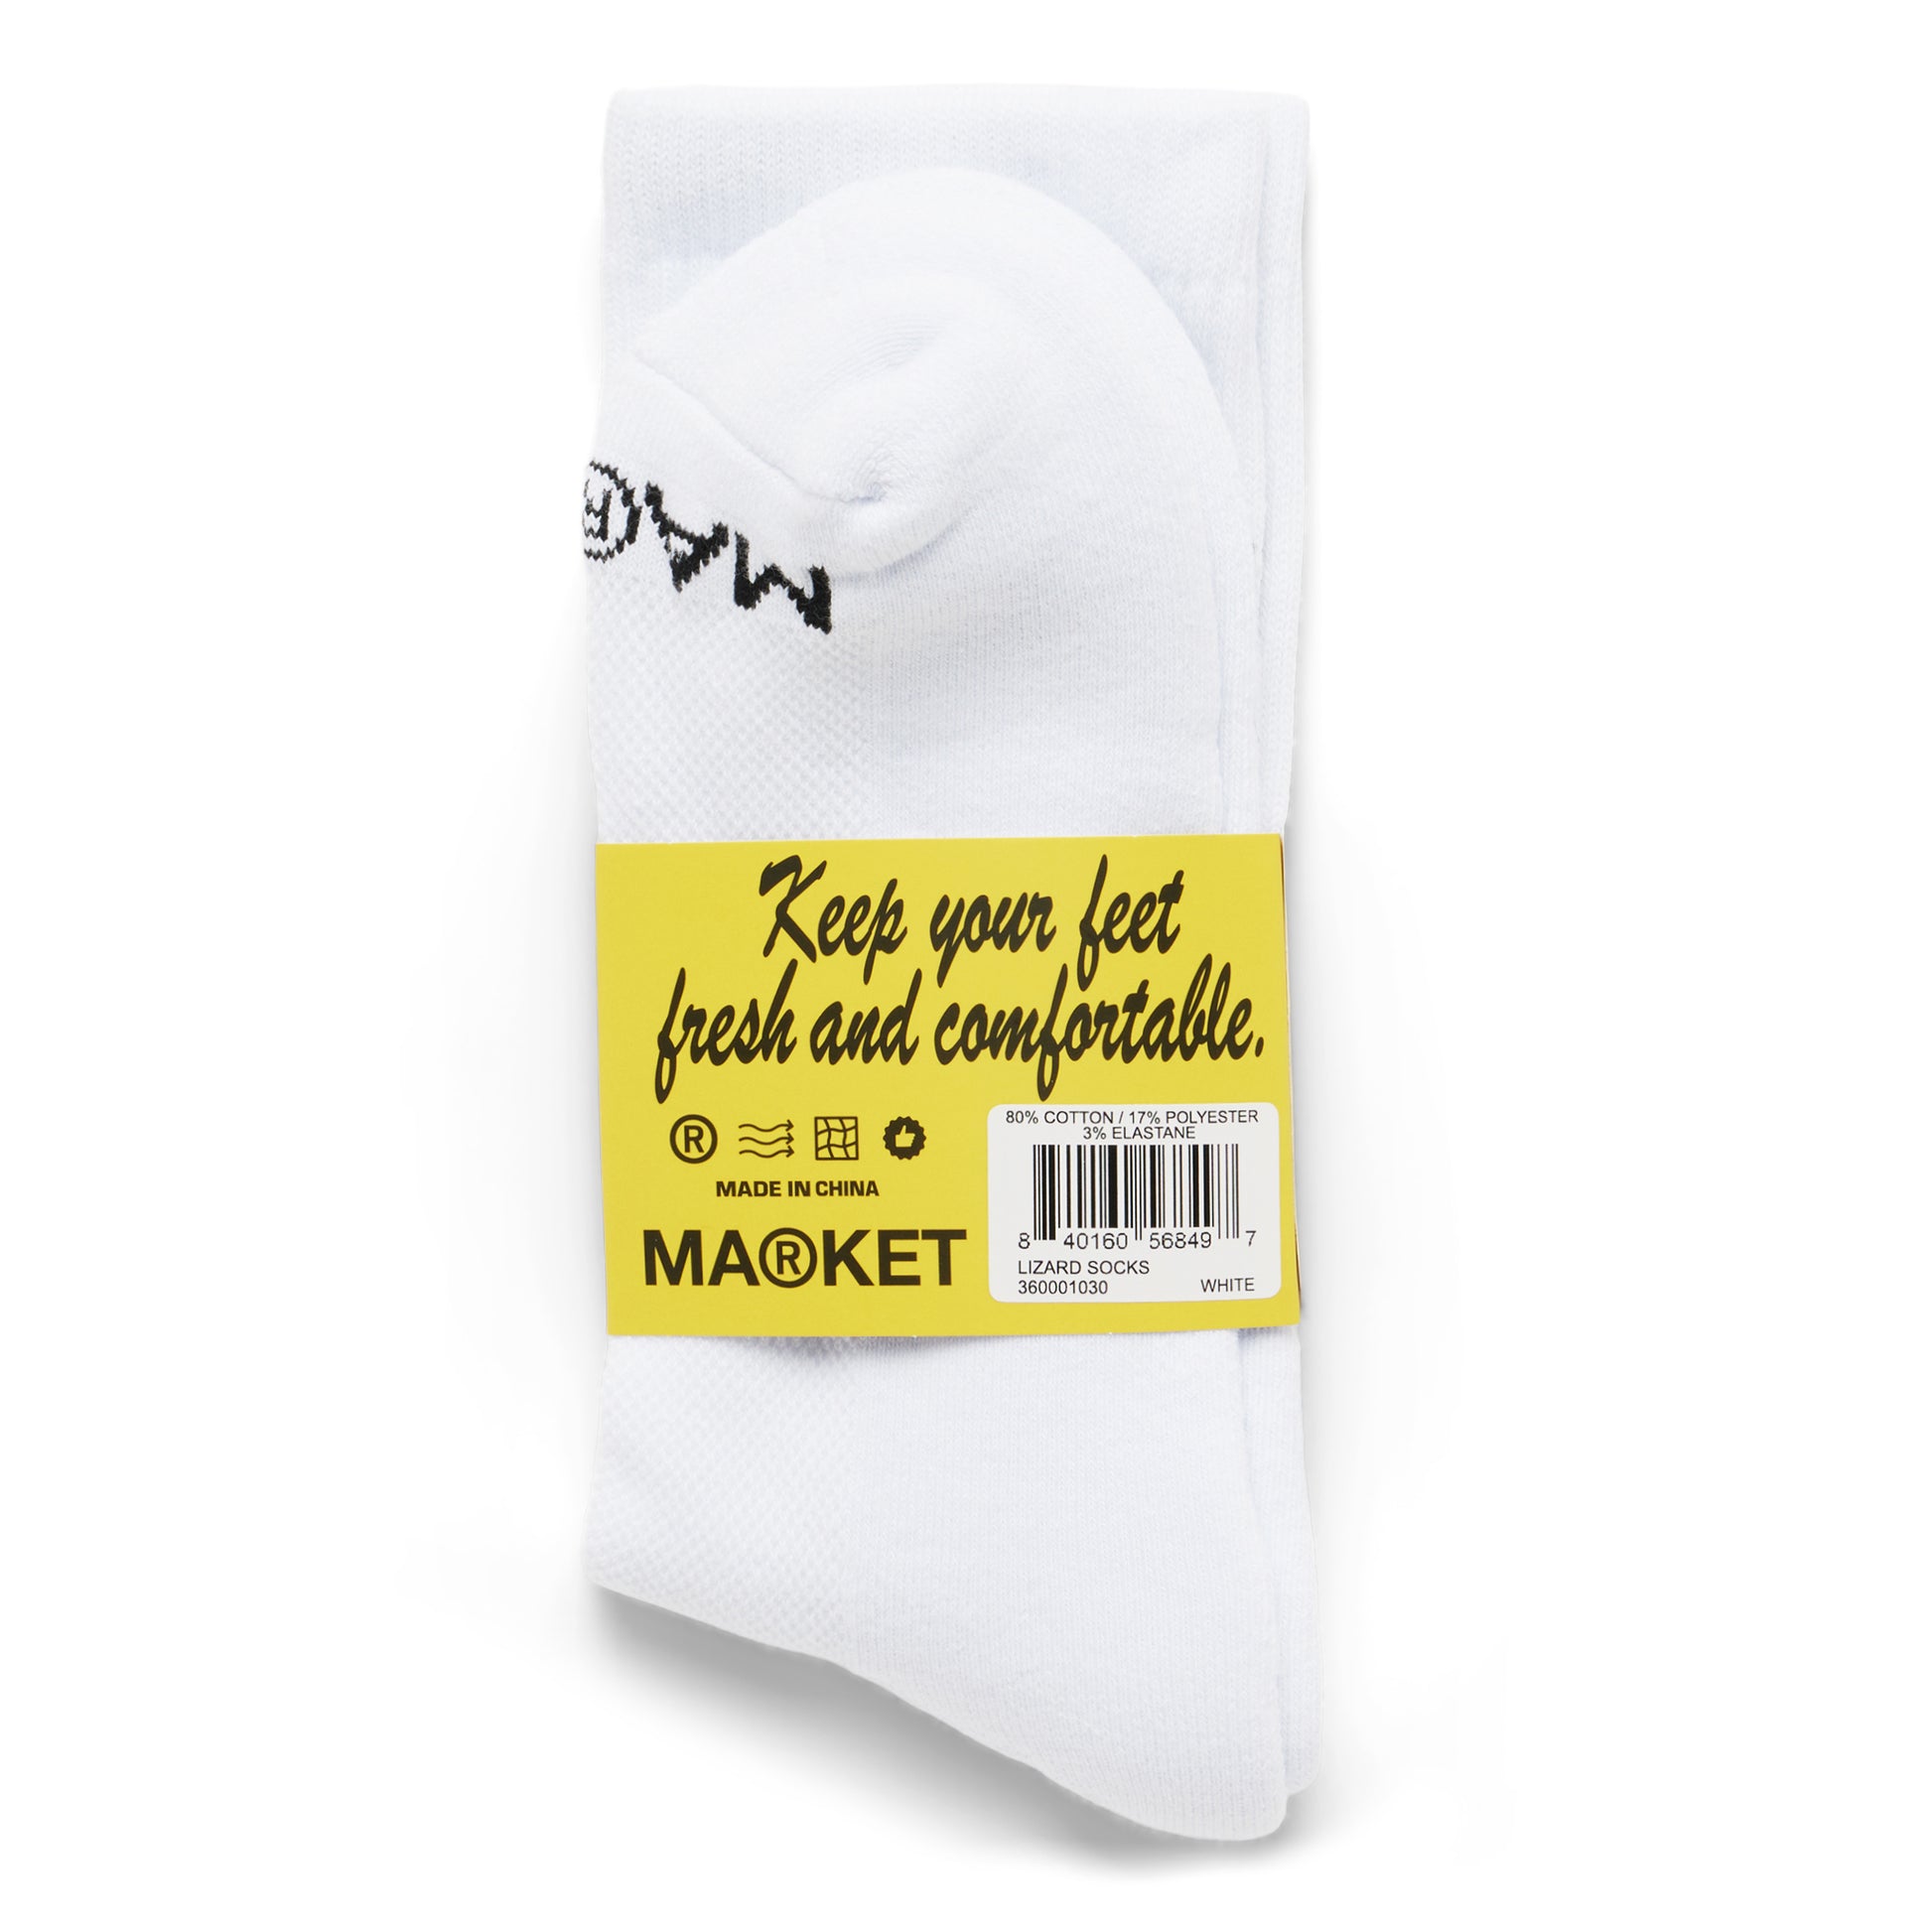 MARKET clothing brand LIZARD SOCKS. Find more graphic tees, socks, hats and small goods at MarketStudios.com. Formally Chinatown Market. 